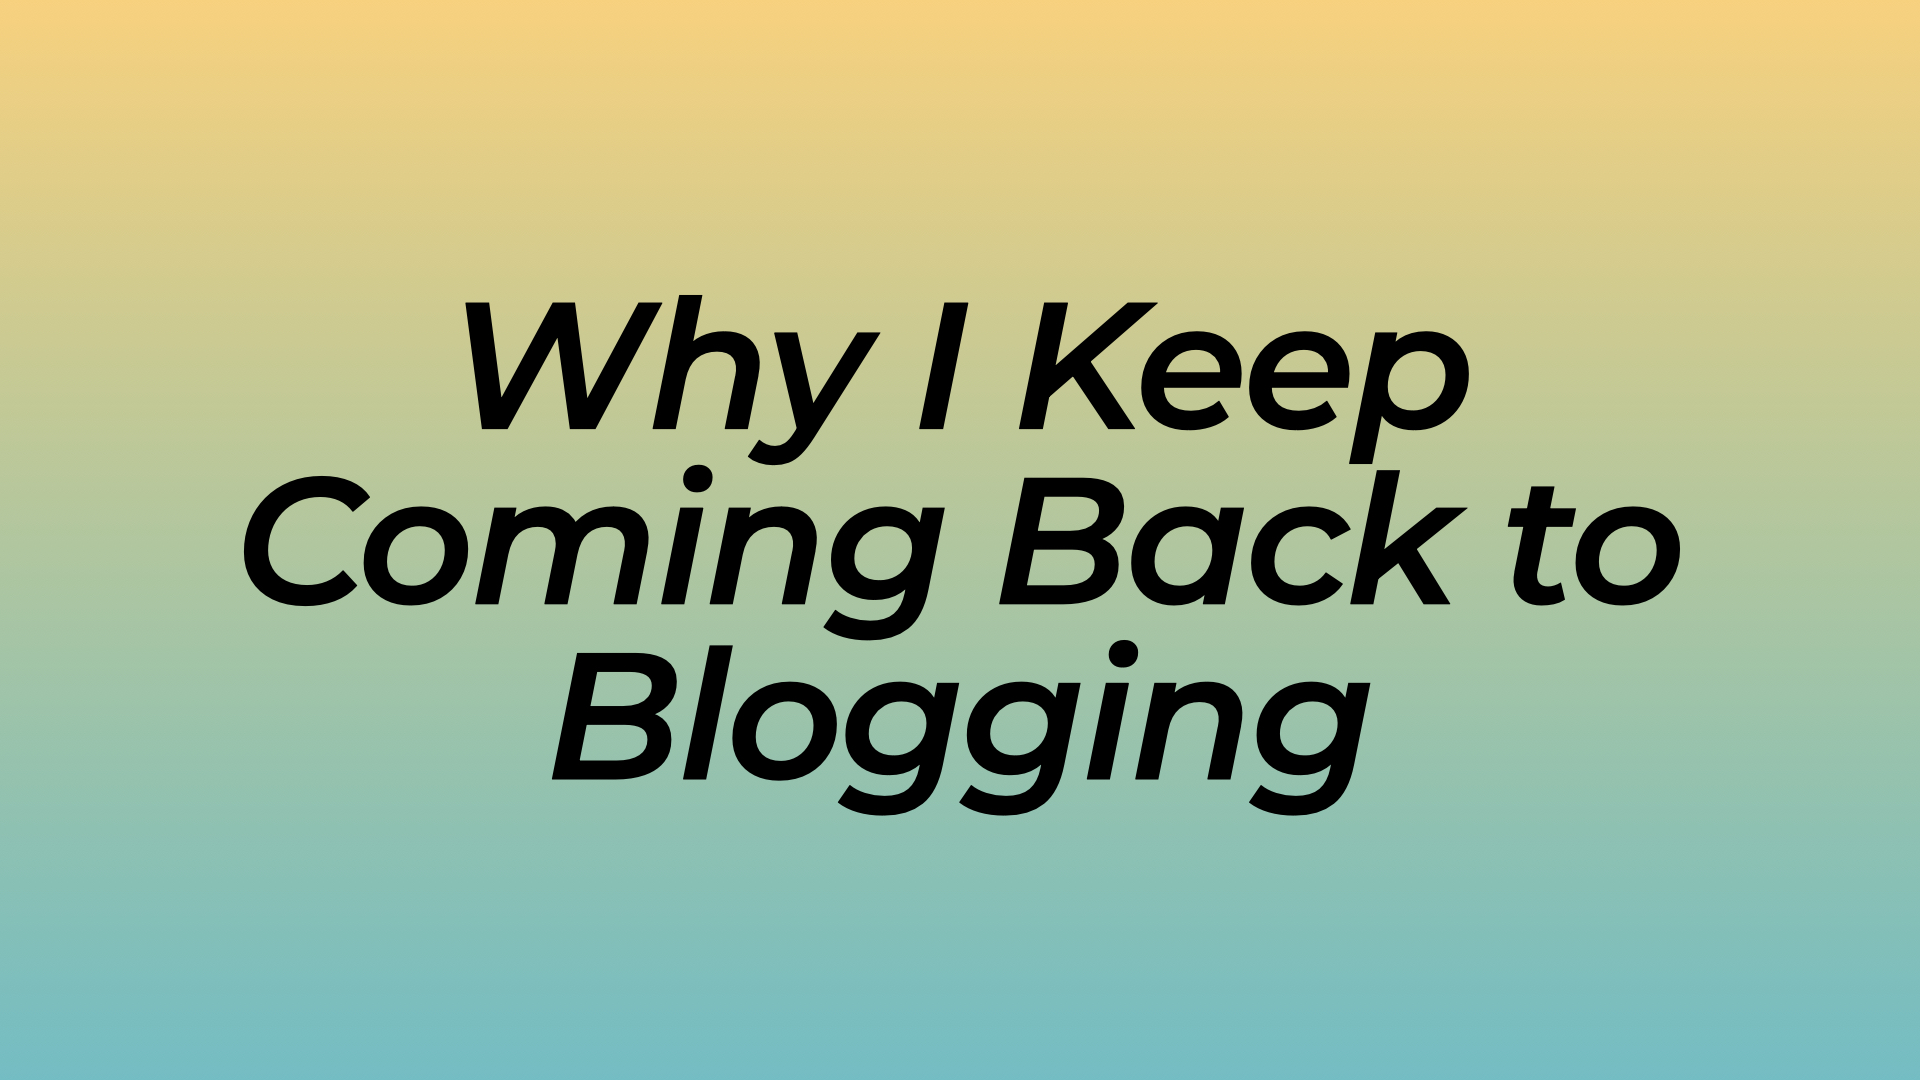 Why I Keep Coming Back to Blogging